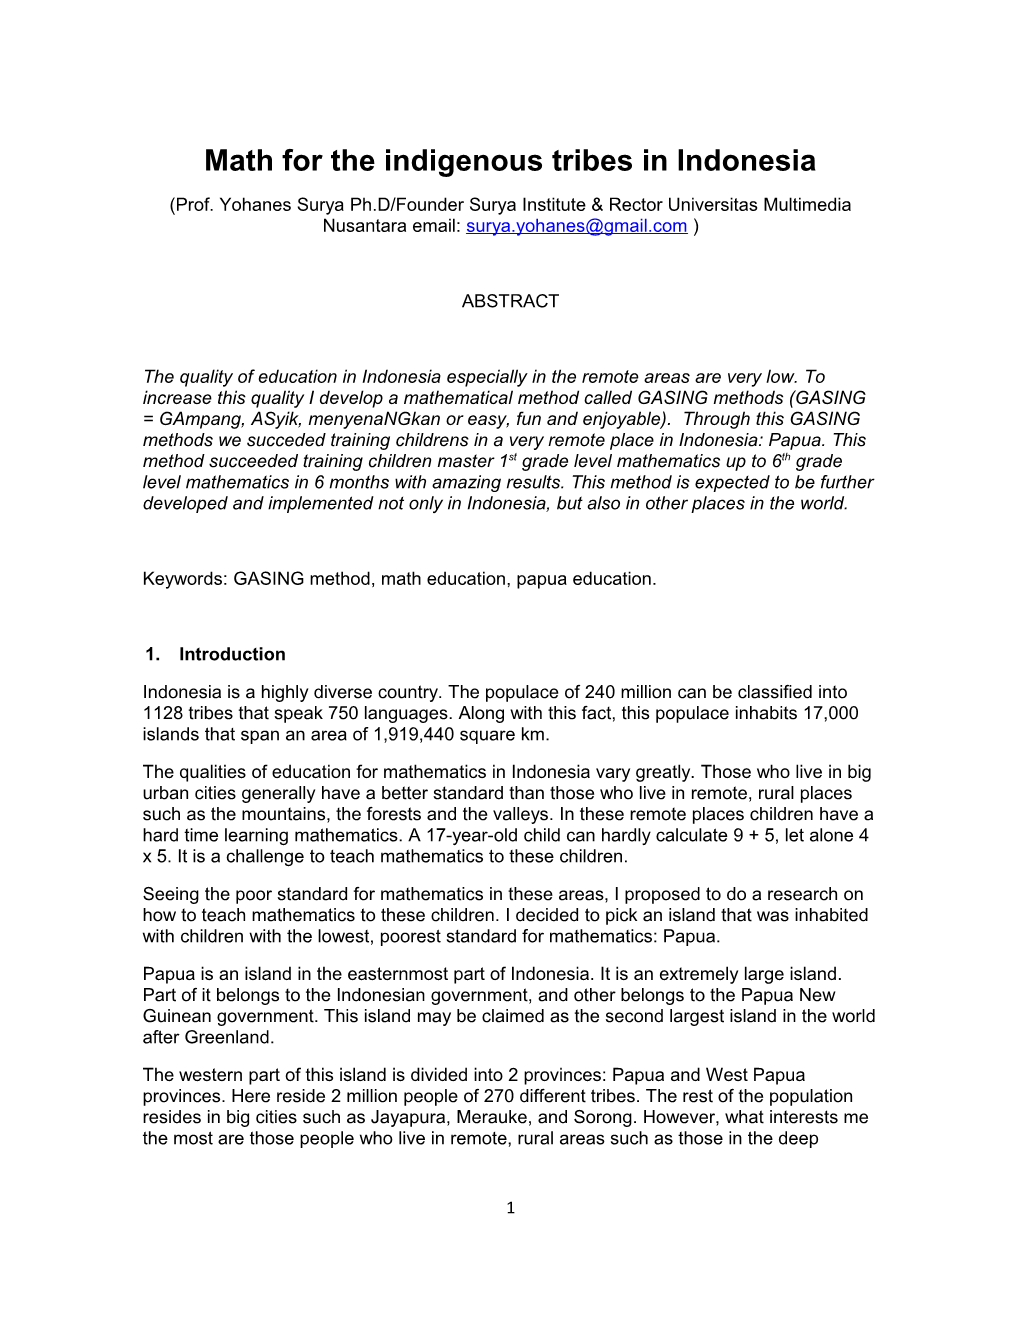 Math for the Indigenous Tribes in Indonesia